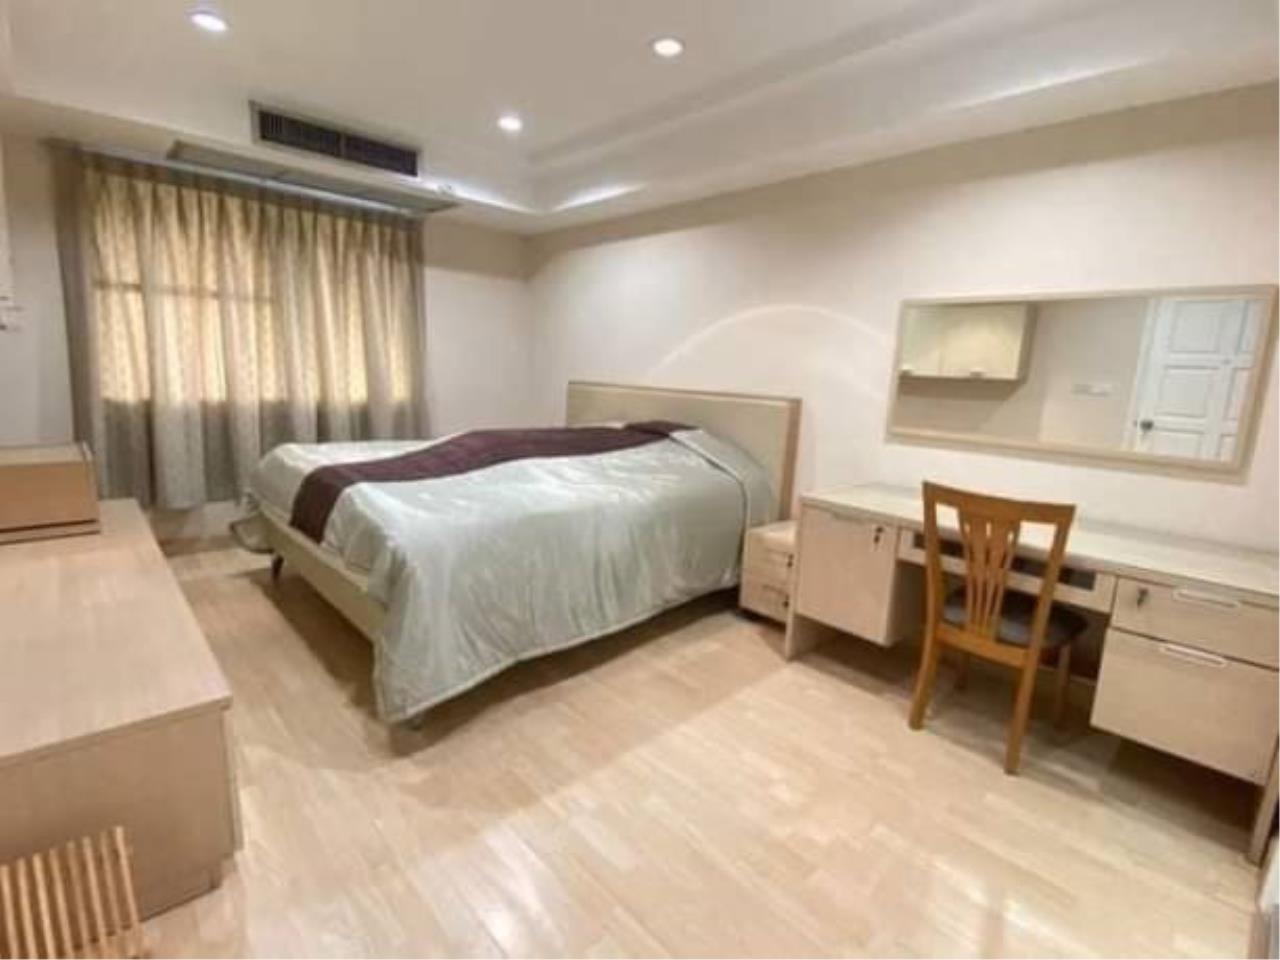 3 bedrooms 2 bathrooms size 140sqm Royal Castle for Rent 50000 THB for Sale 15mTHB